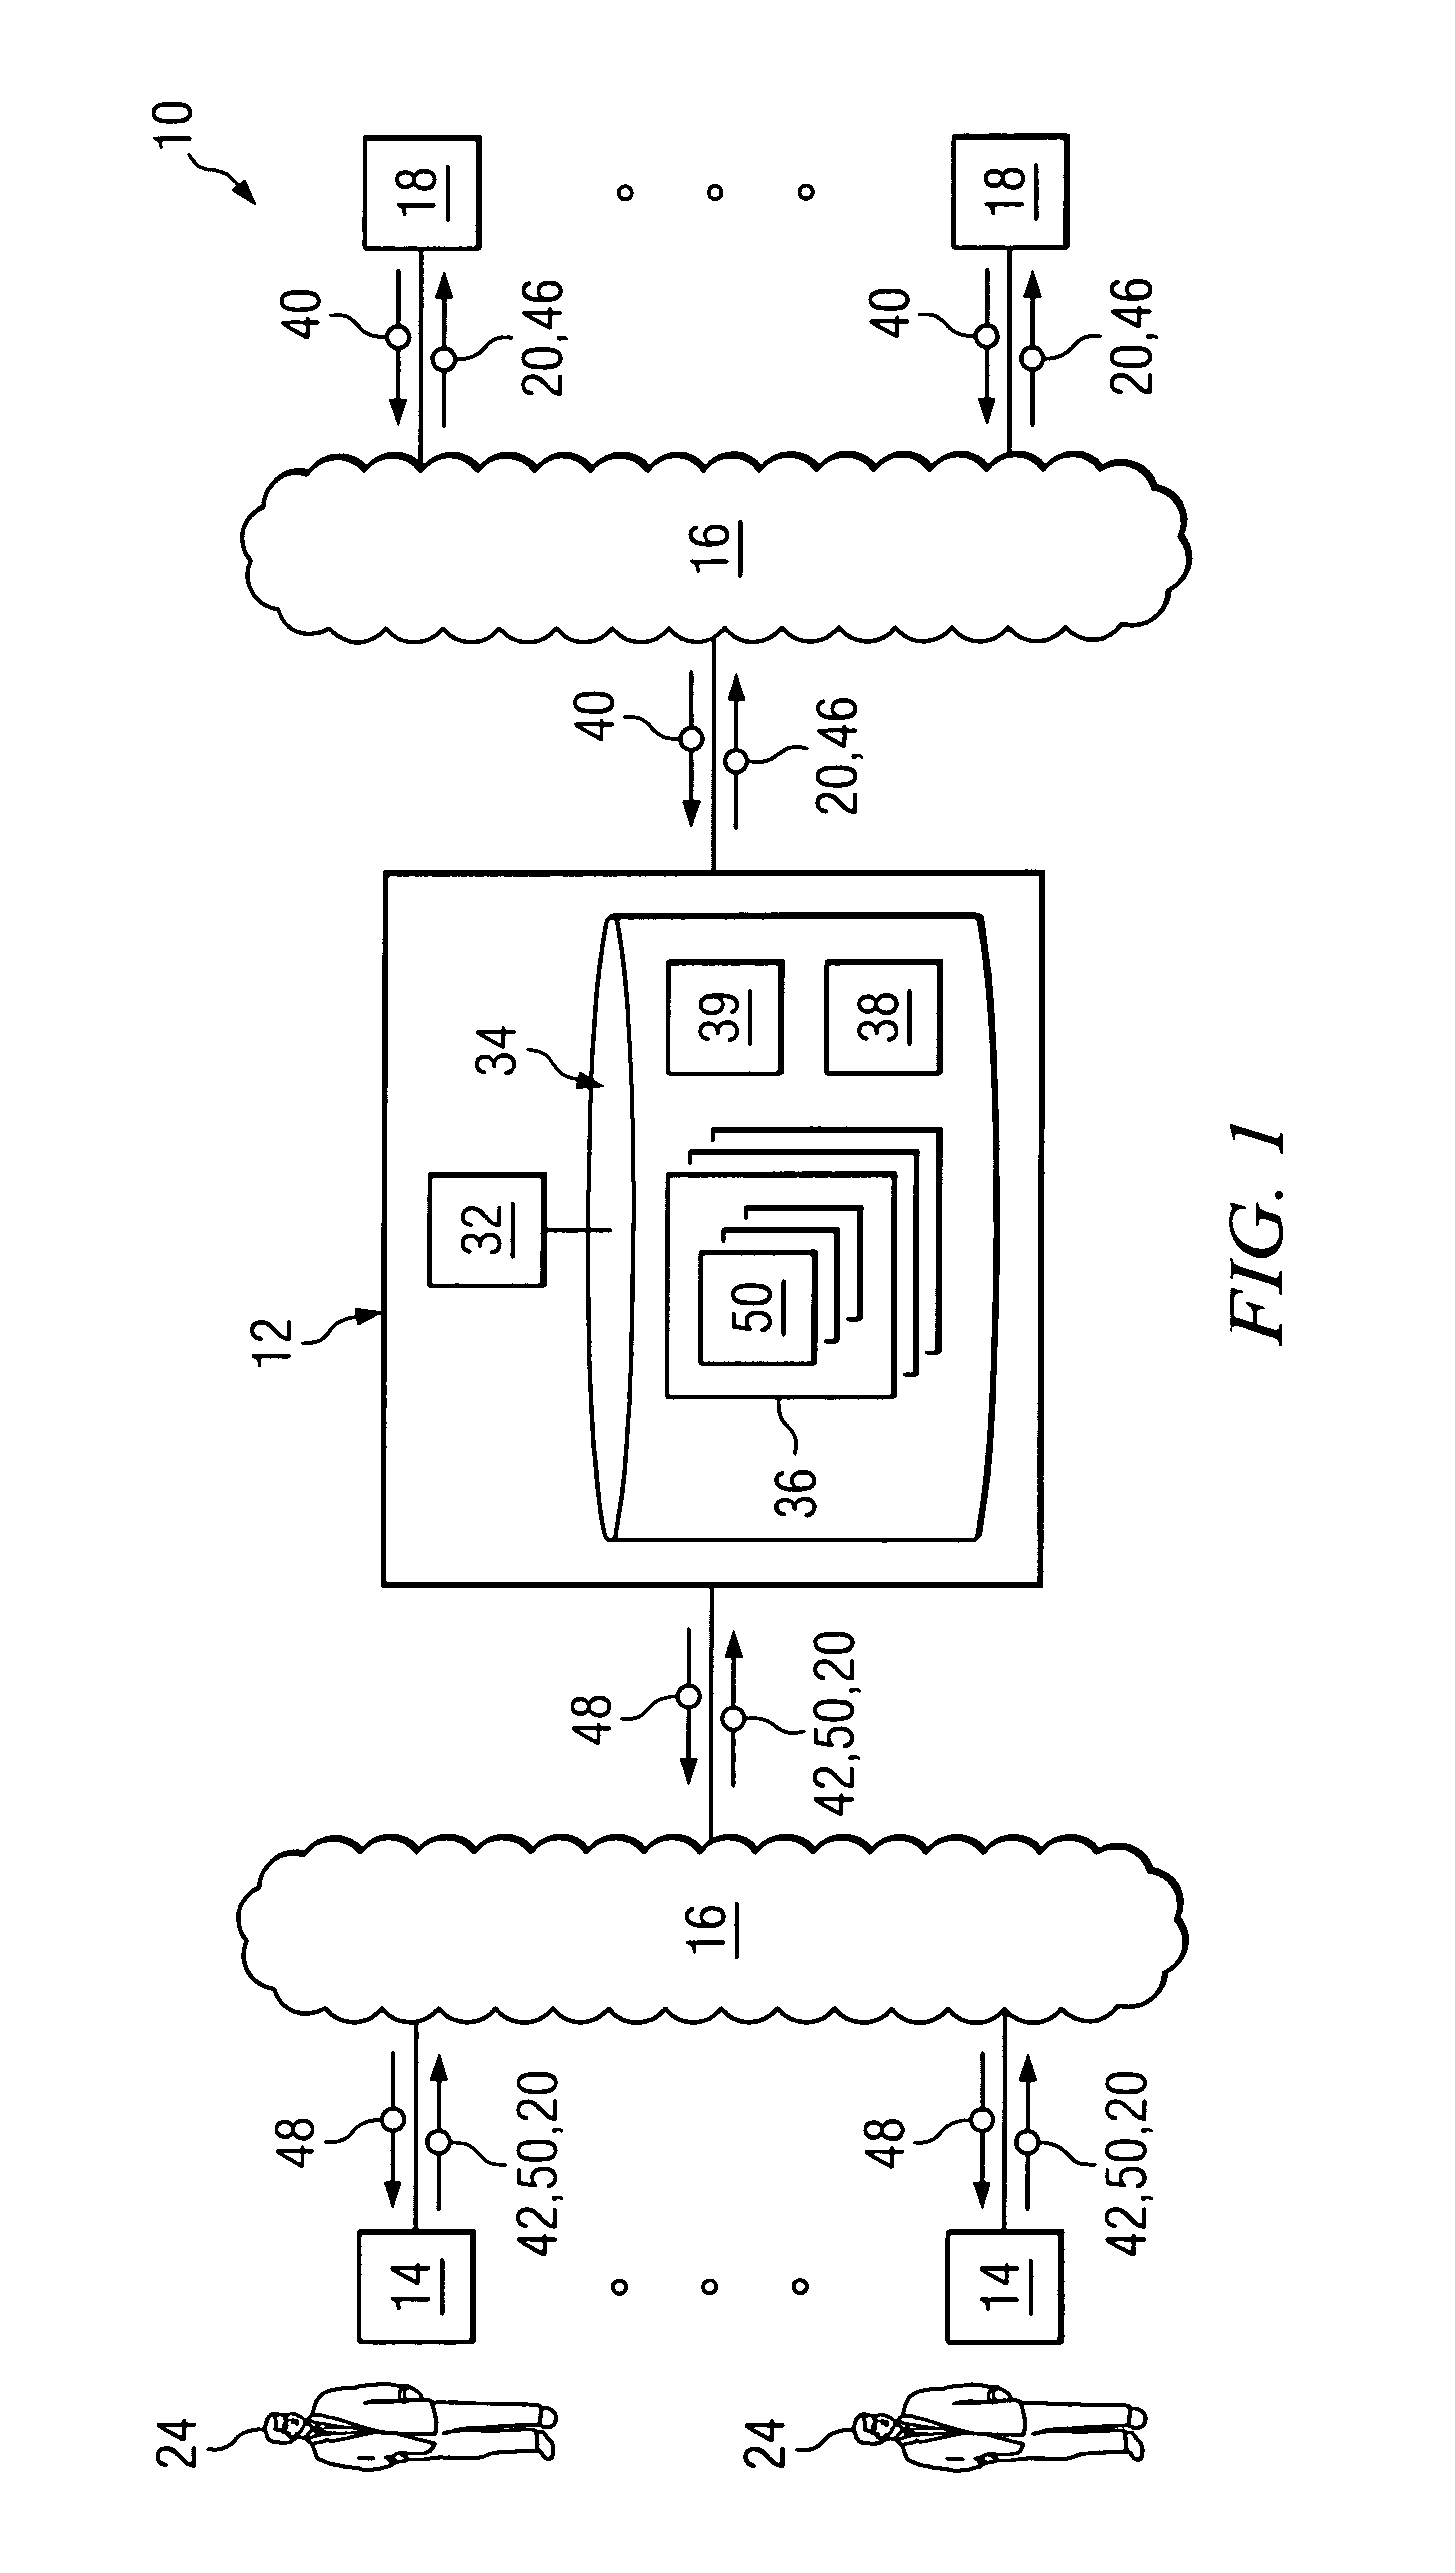 System and method for processing composite trading orders at a client